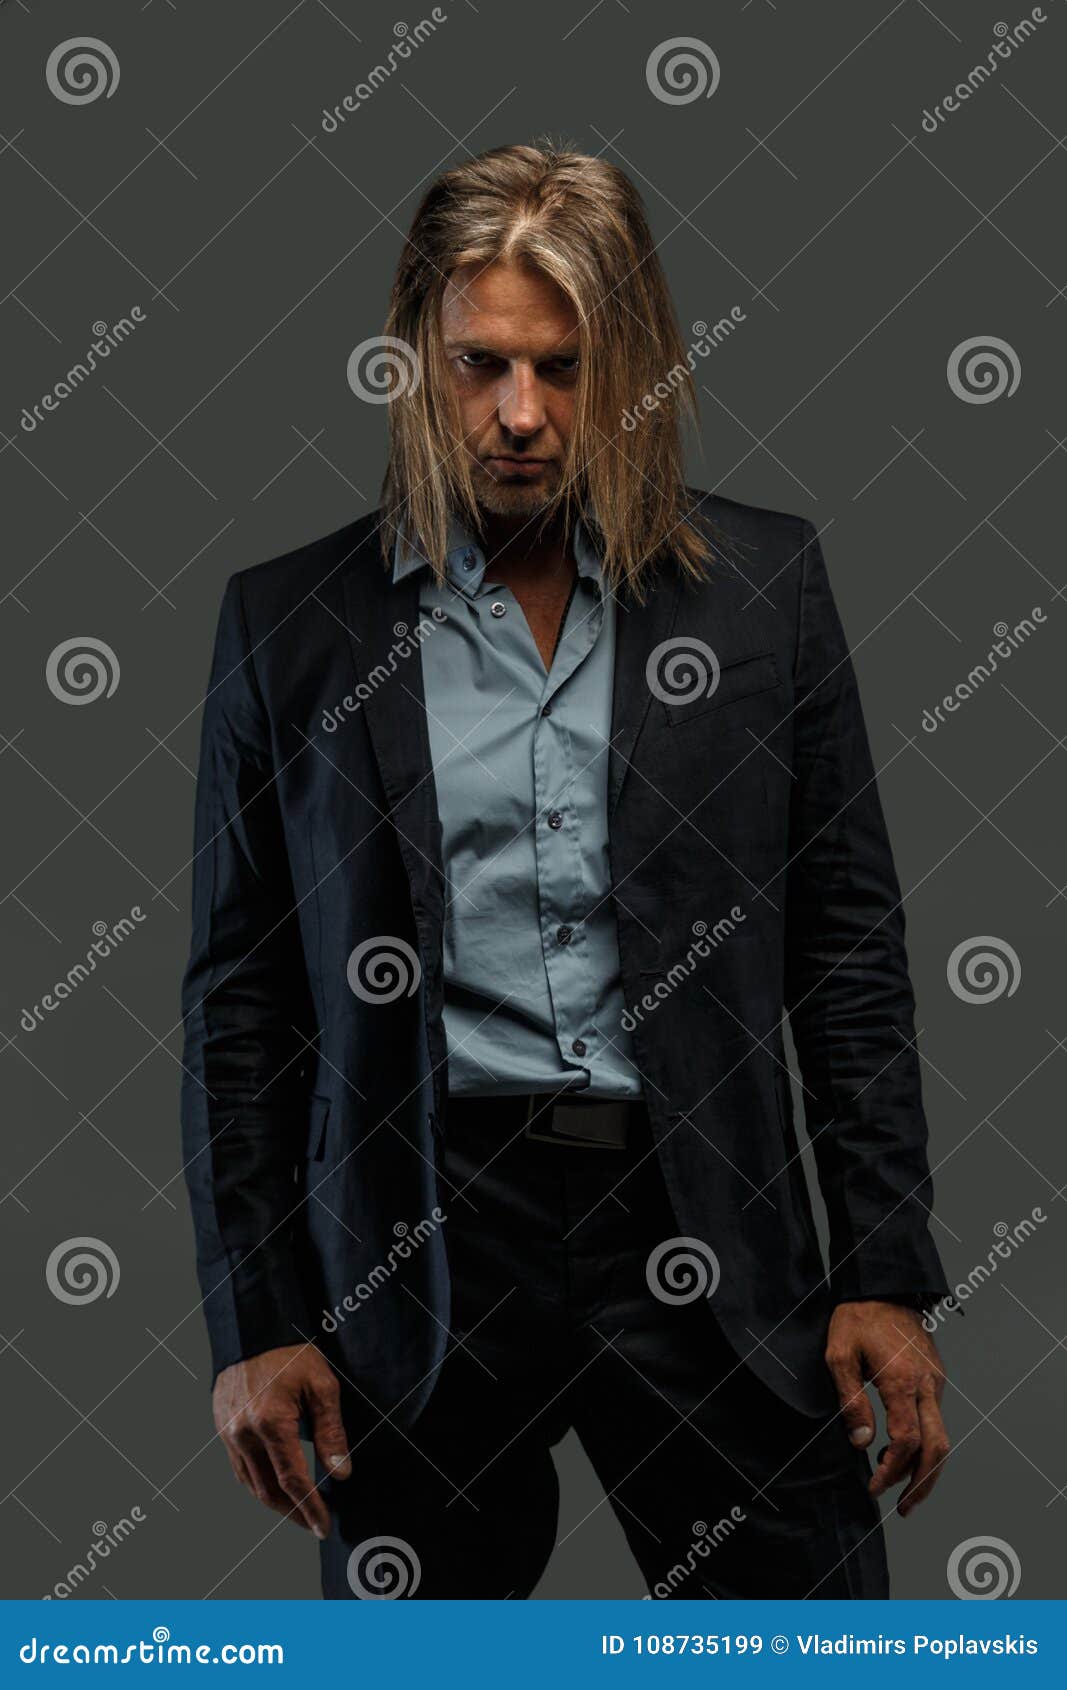 long hair man in suit possing. stock image - image of